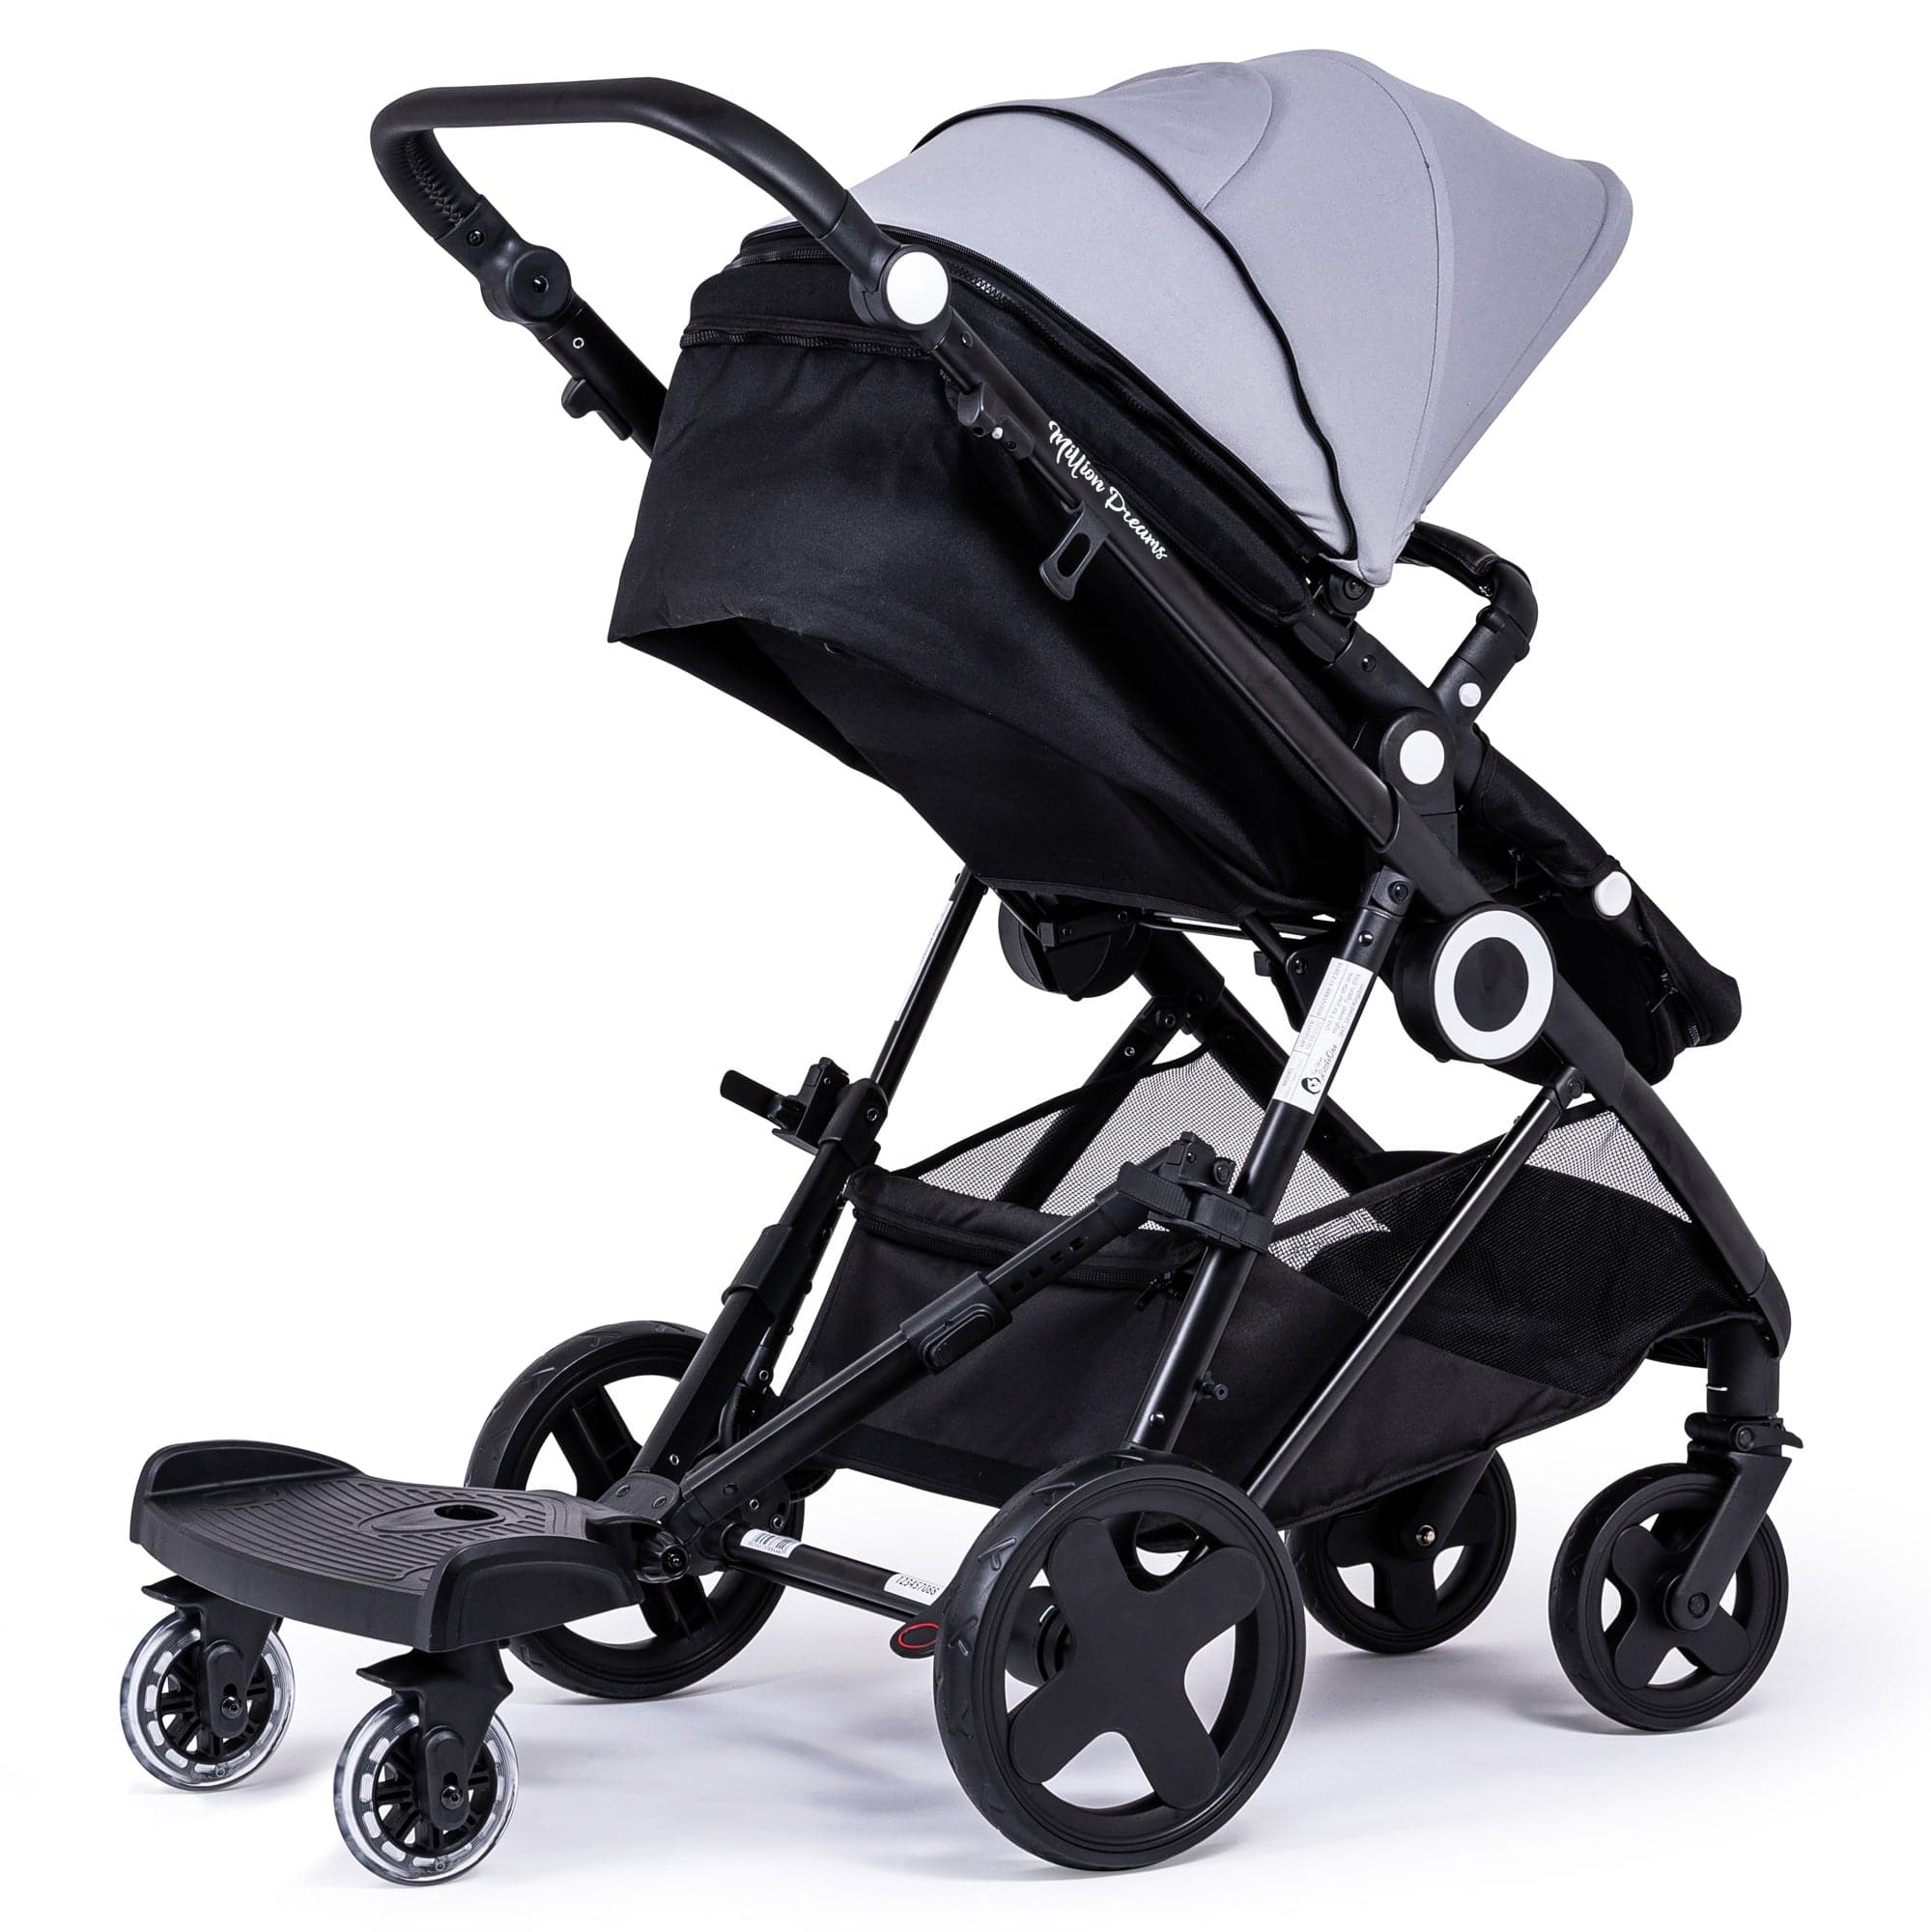 Ride On Board with Saddle Compatible with Babystyle - For Your Little One